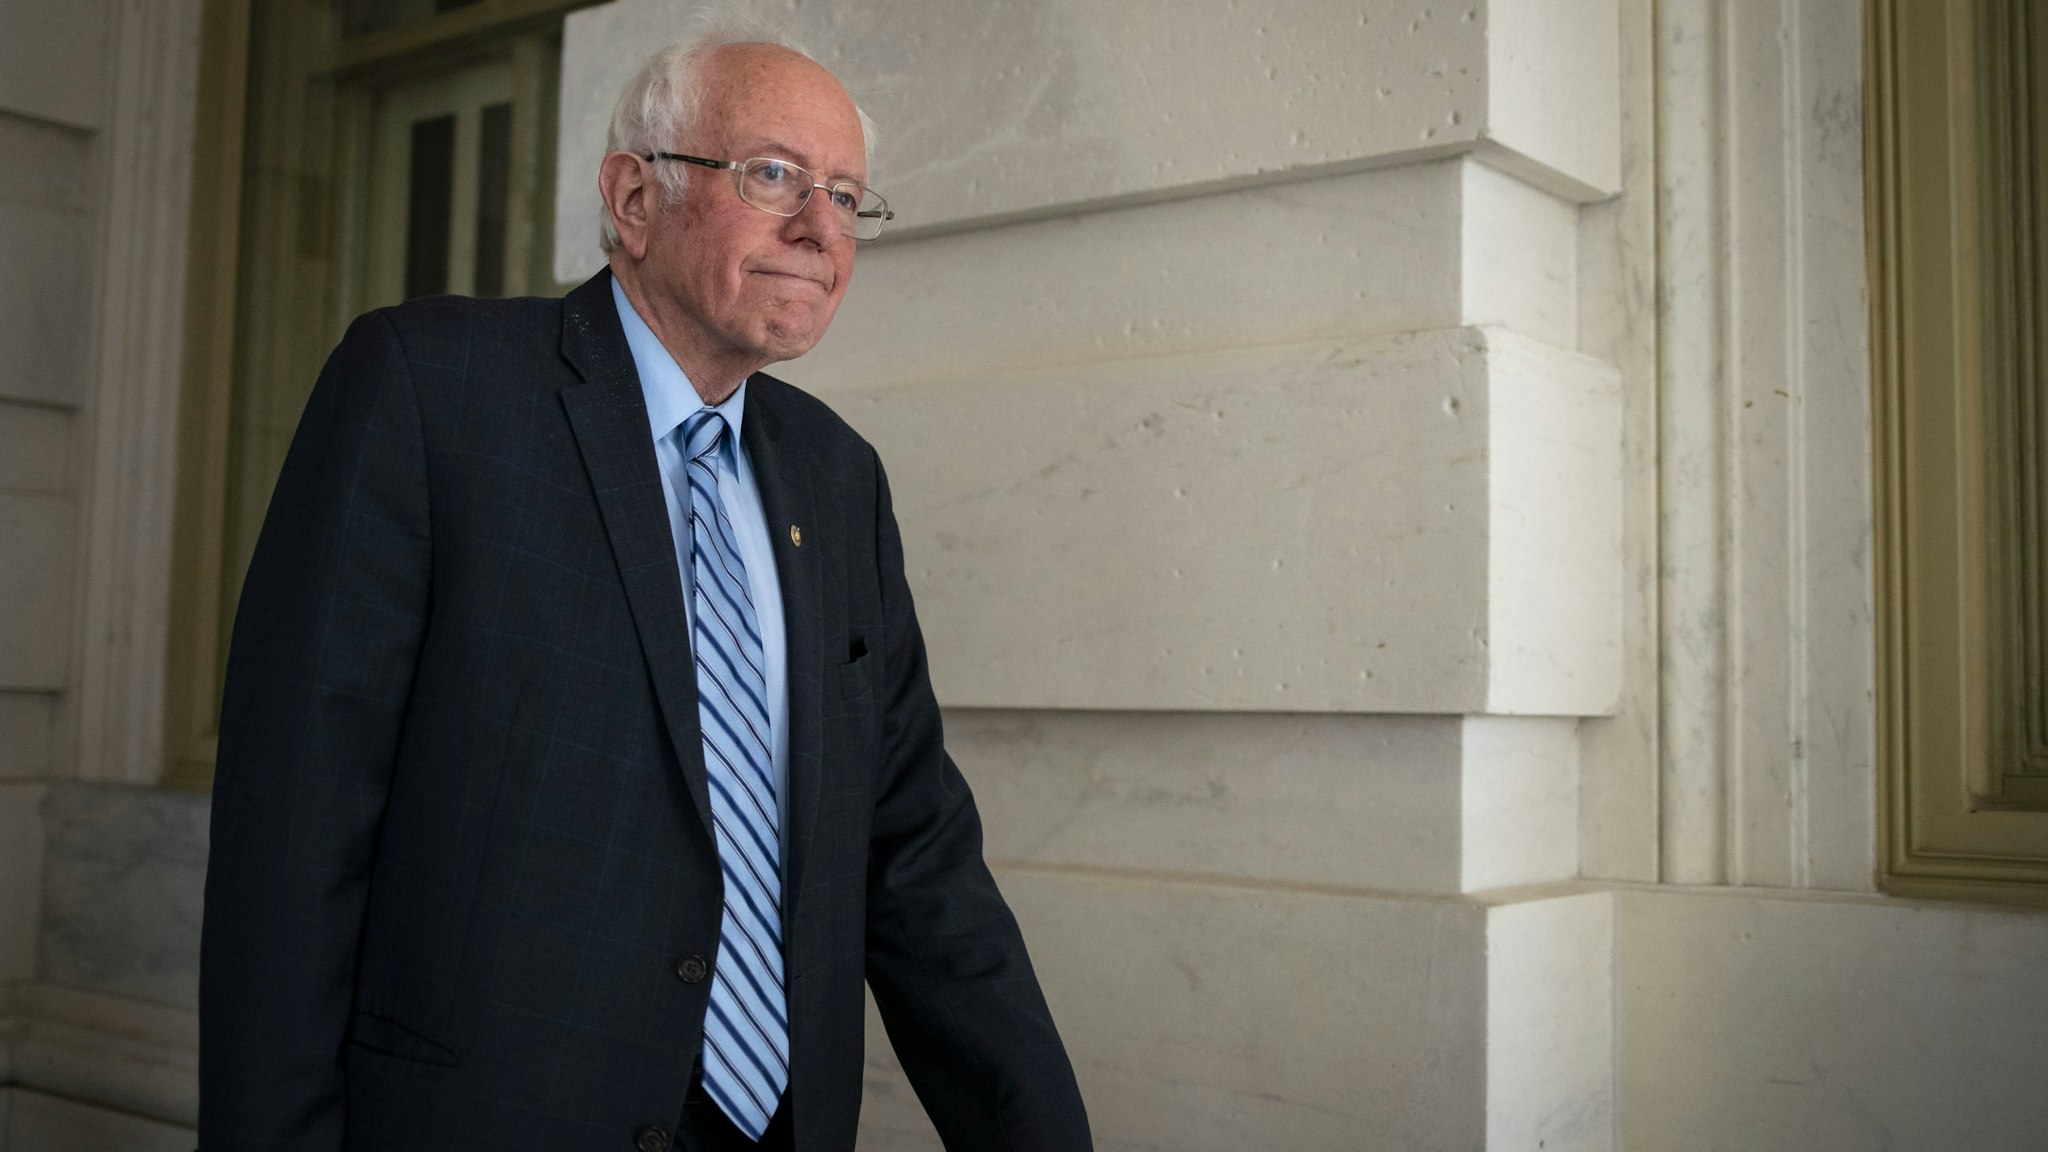 Senator Bernie Sanders, an Independent from Vermont and 2020 presidential candidate, exits the U.S. Capitol after a vote in Washington, D.C., U.S., on Wednesday, March 18, 2020. The Senate cleared the second major bill responding to the coronavirus pandemic, with lawmakers rushing to follow up with an additional economic rescue package that President Donald Trump's administration estimates will cost $1.3 trillion. Photographer: Al Drago/Bloomberg via Getty Images